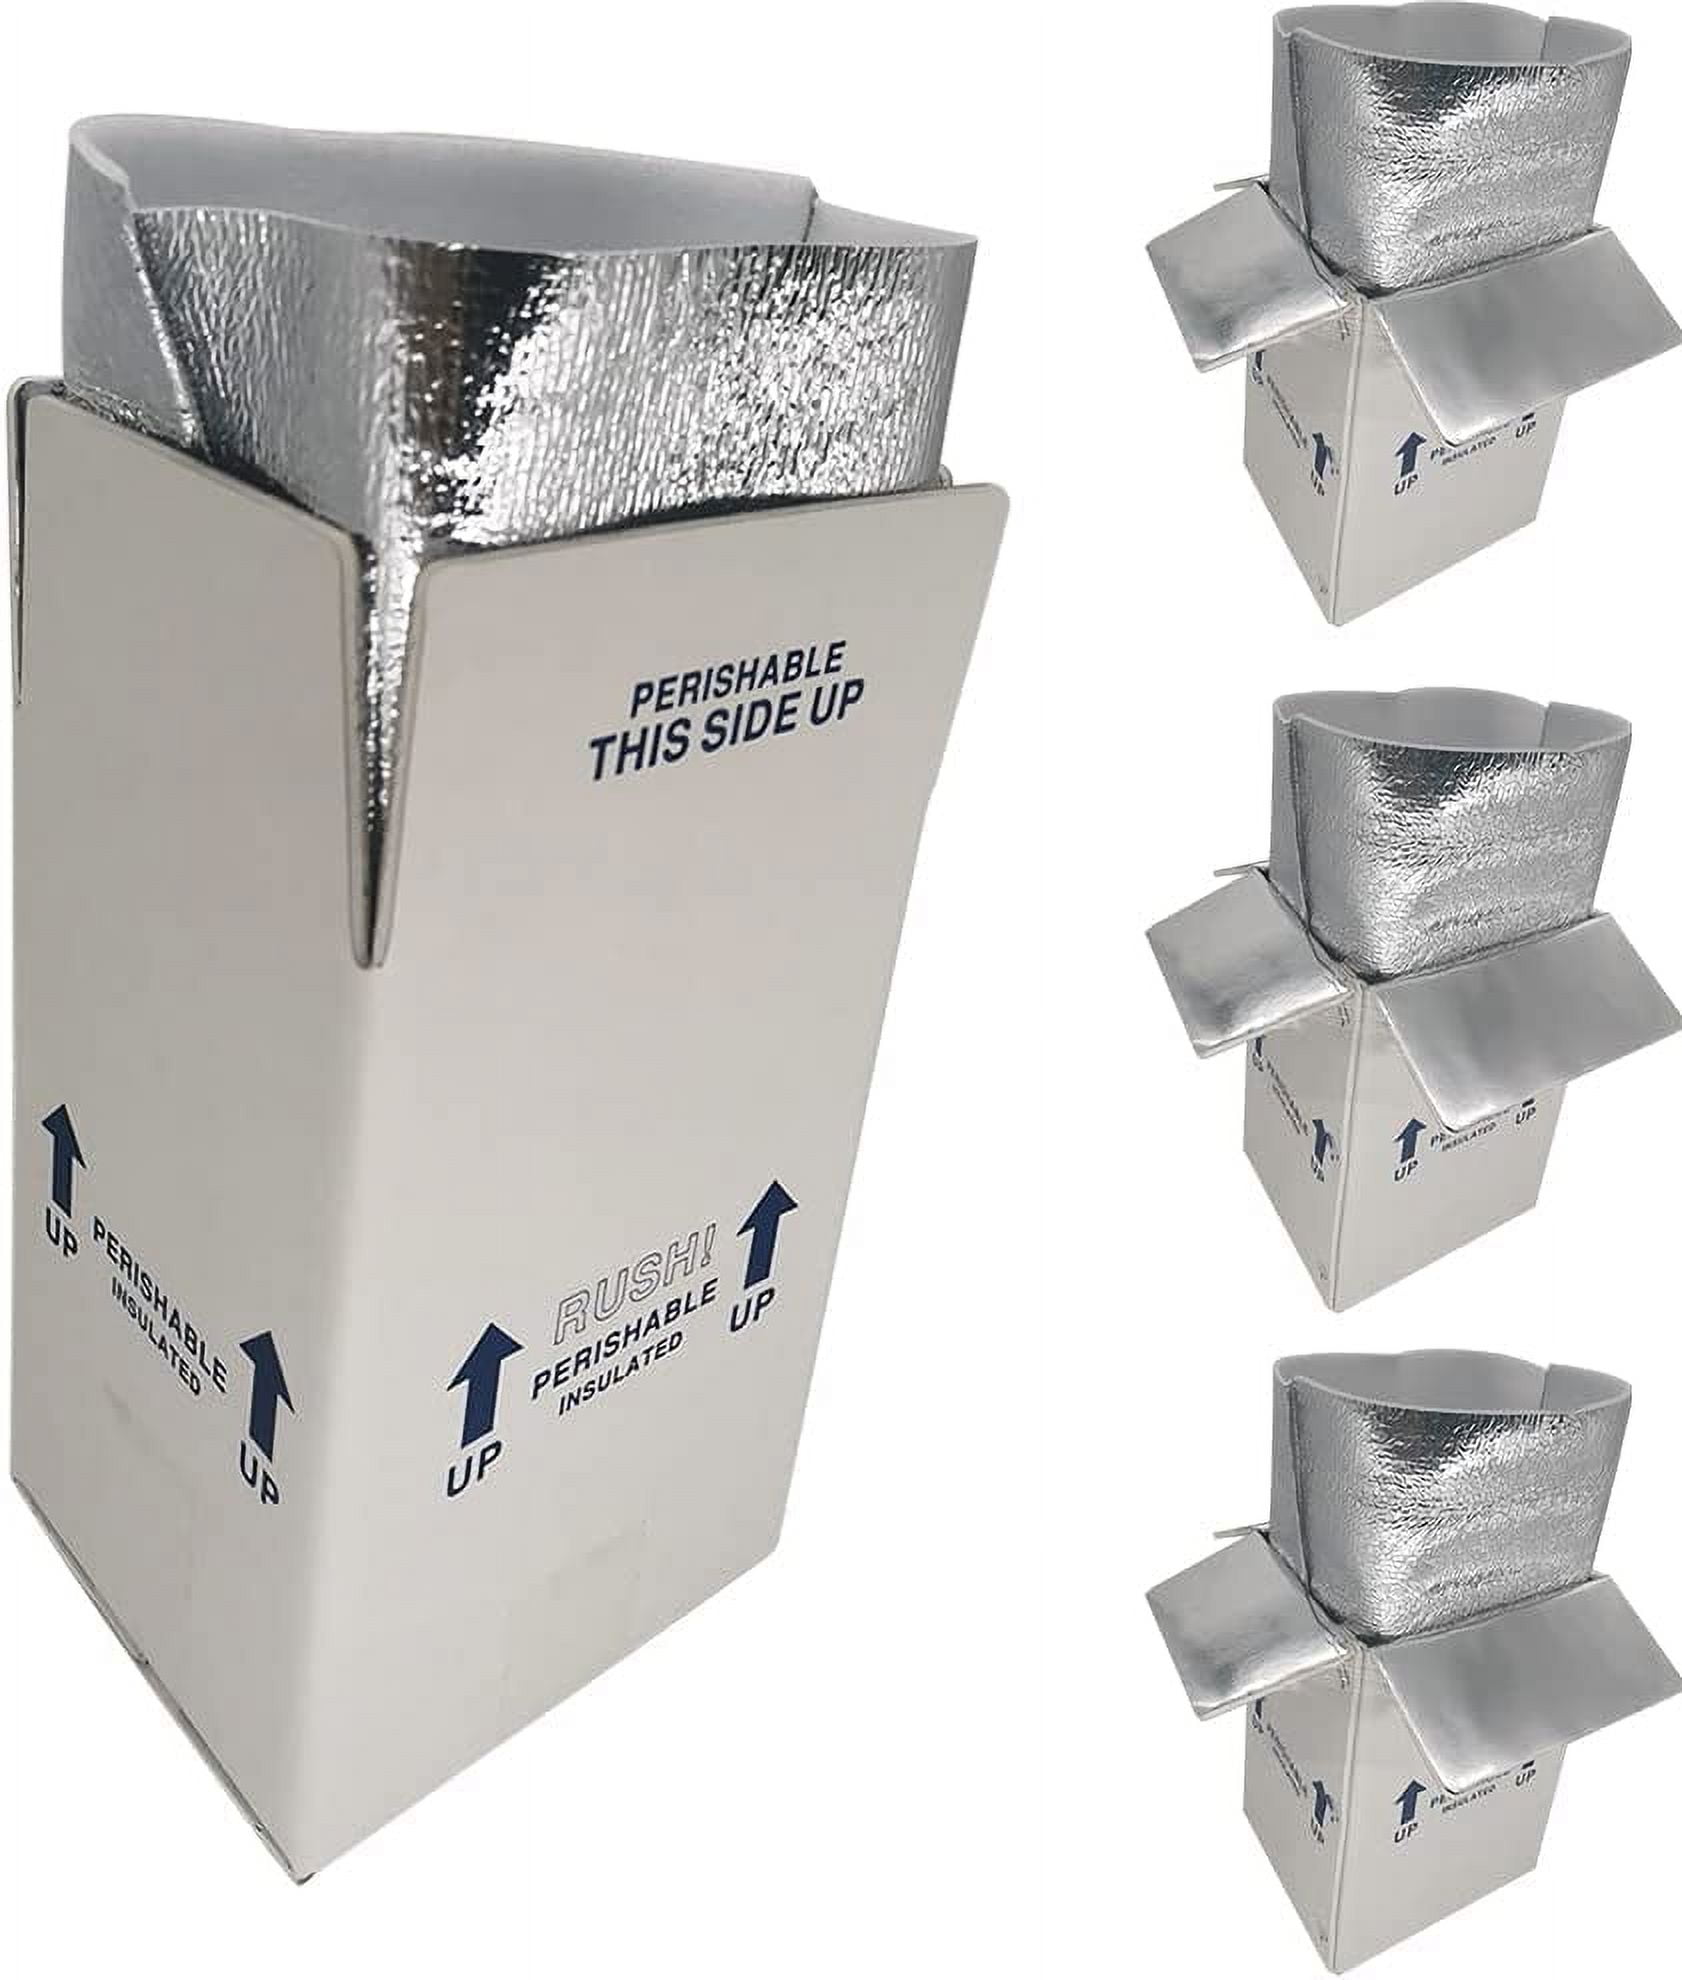 ALUMINIUM FOIL INSULATION SHIPPING BAG INSULATED BOX LINERS / THERMAL BOX  LINERS